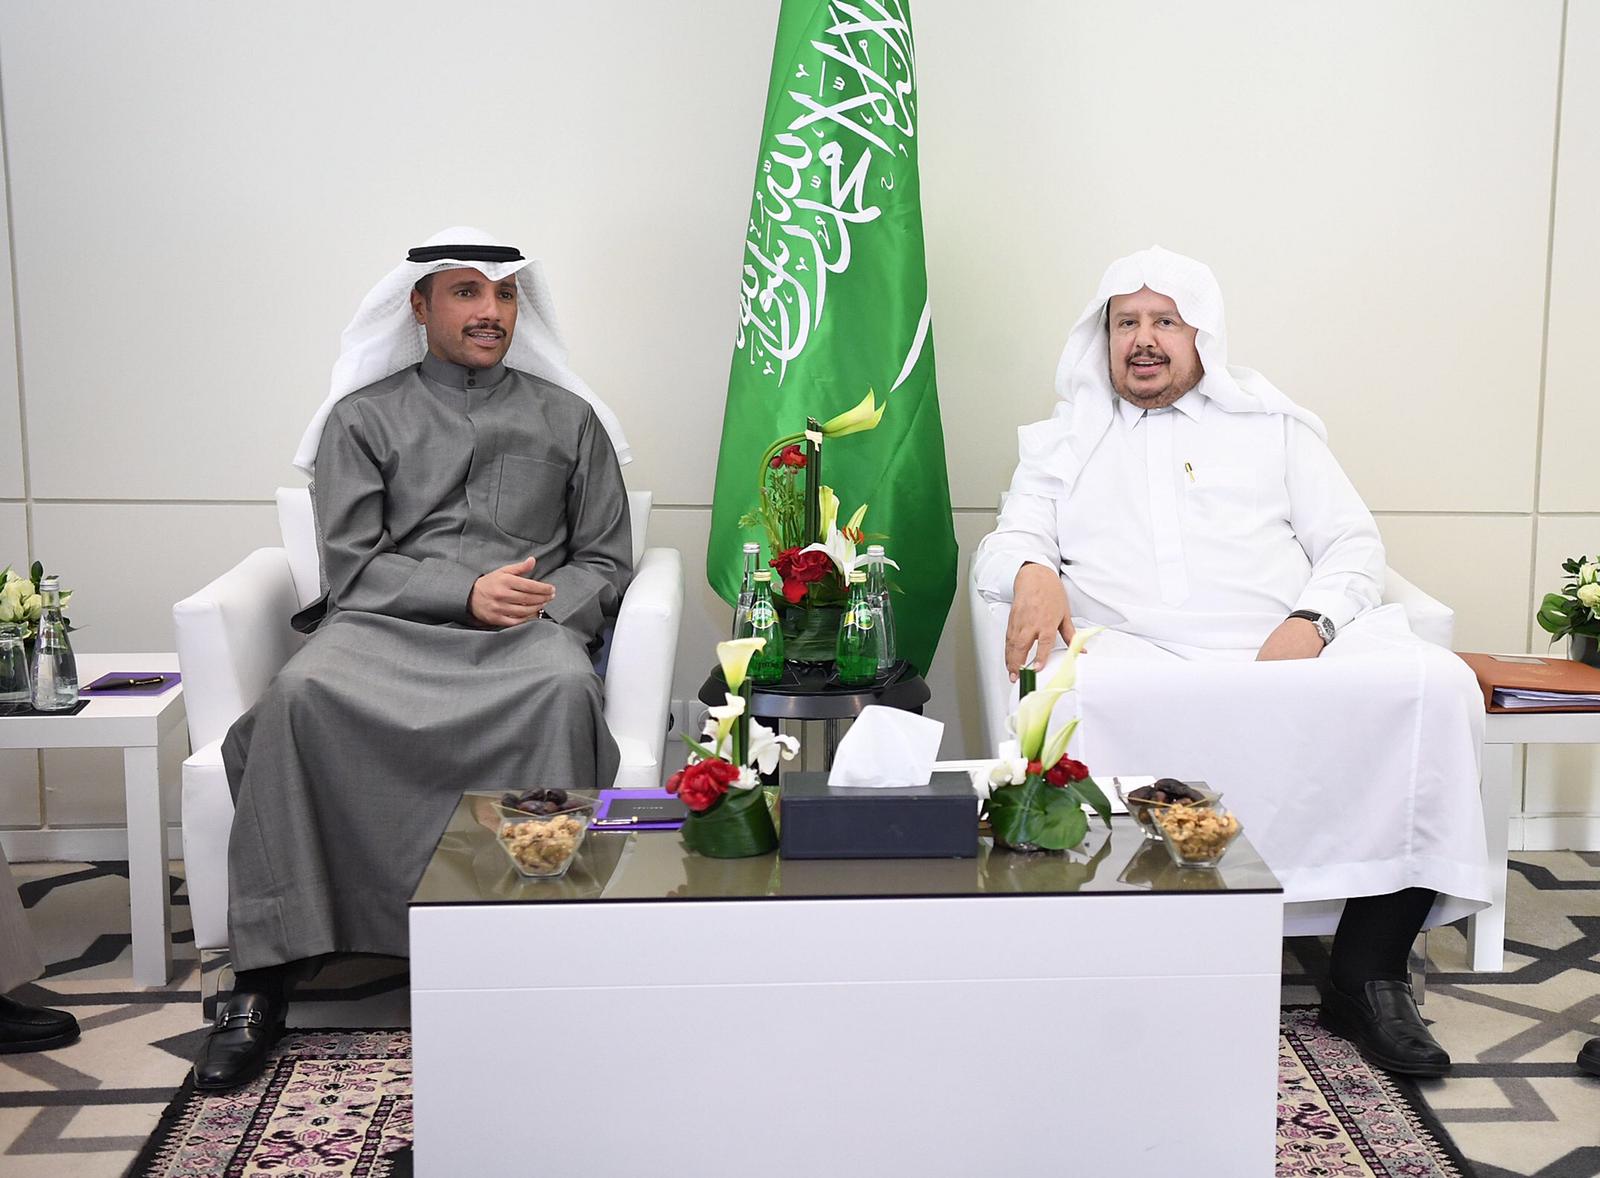 Kuwait National Assembly Speaker Marzouq Al-Ghanim meets  with Dr. Sheikh Abdullah Al-Sheikh, speaker of the Saudi Shura Council